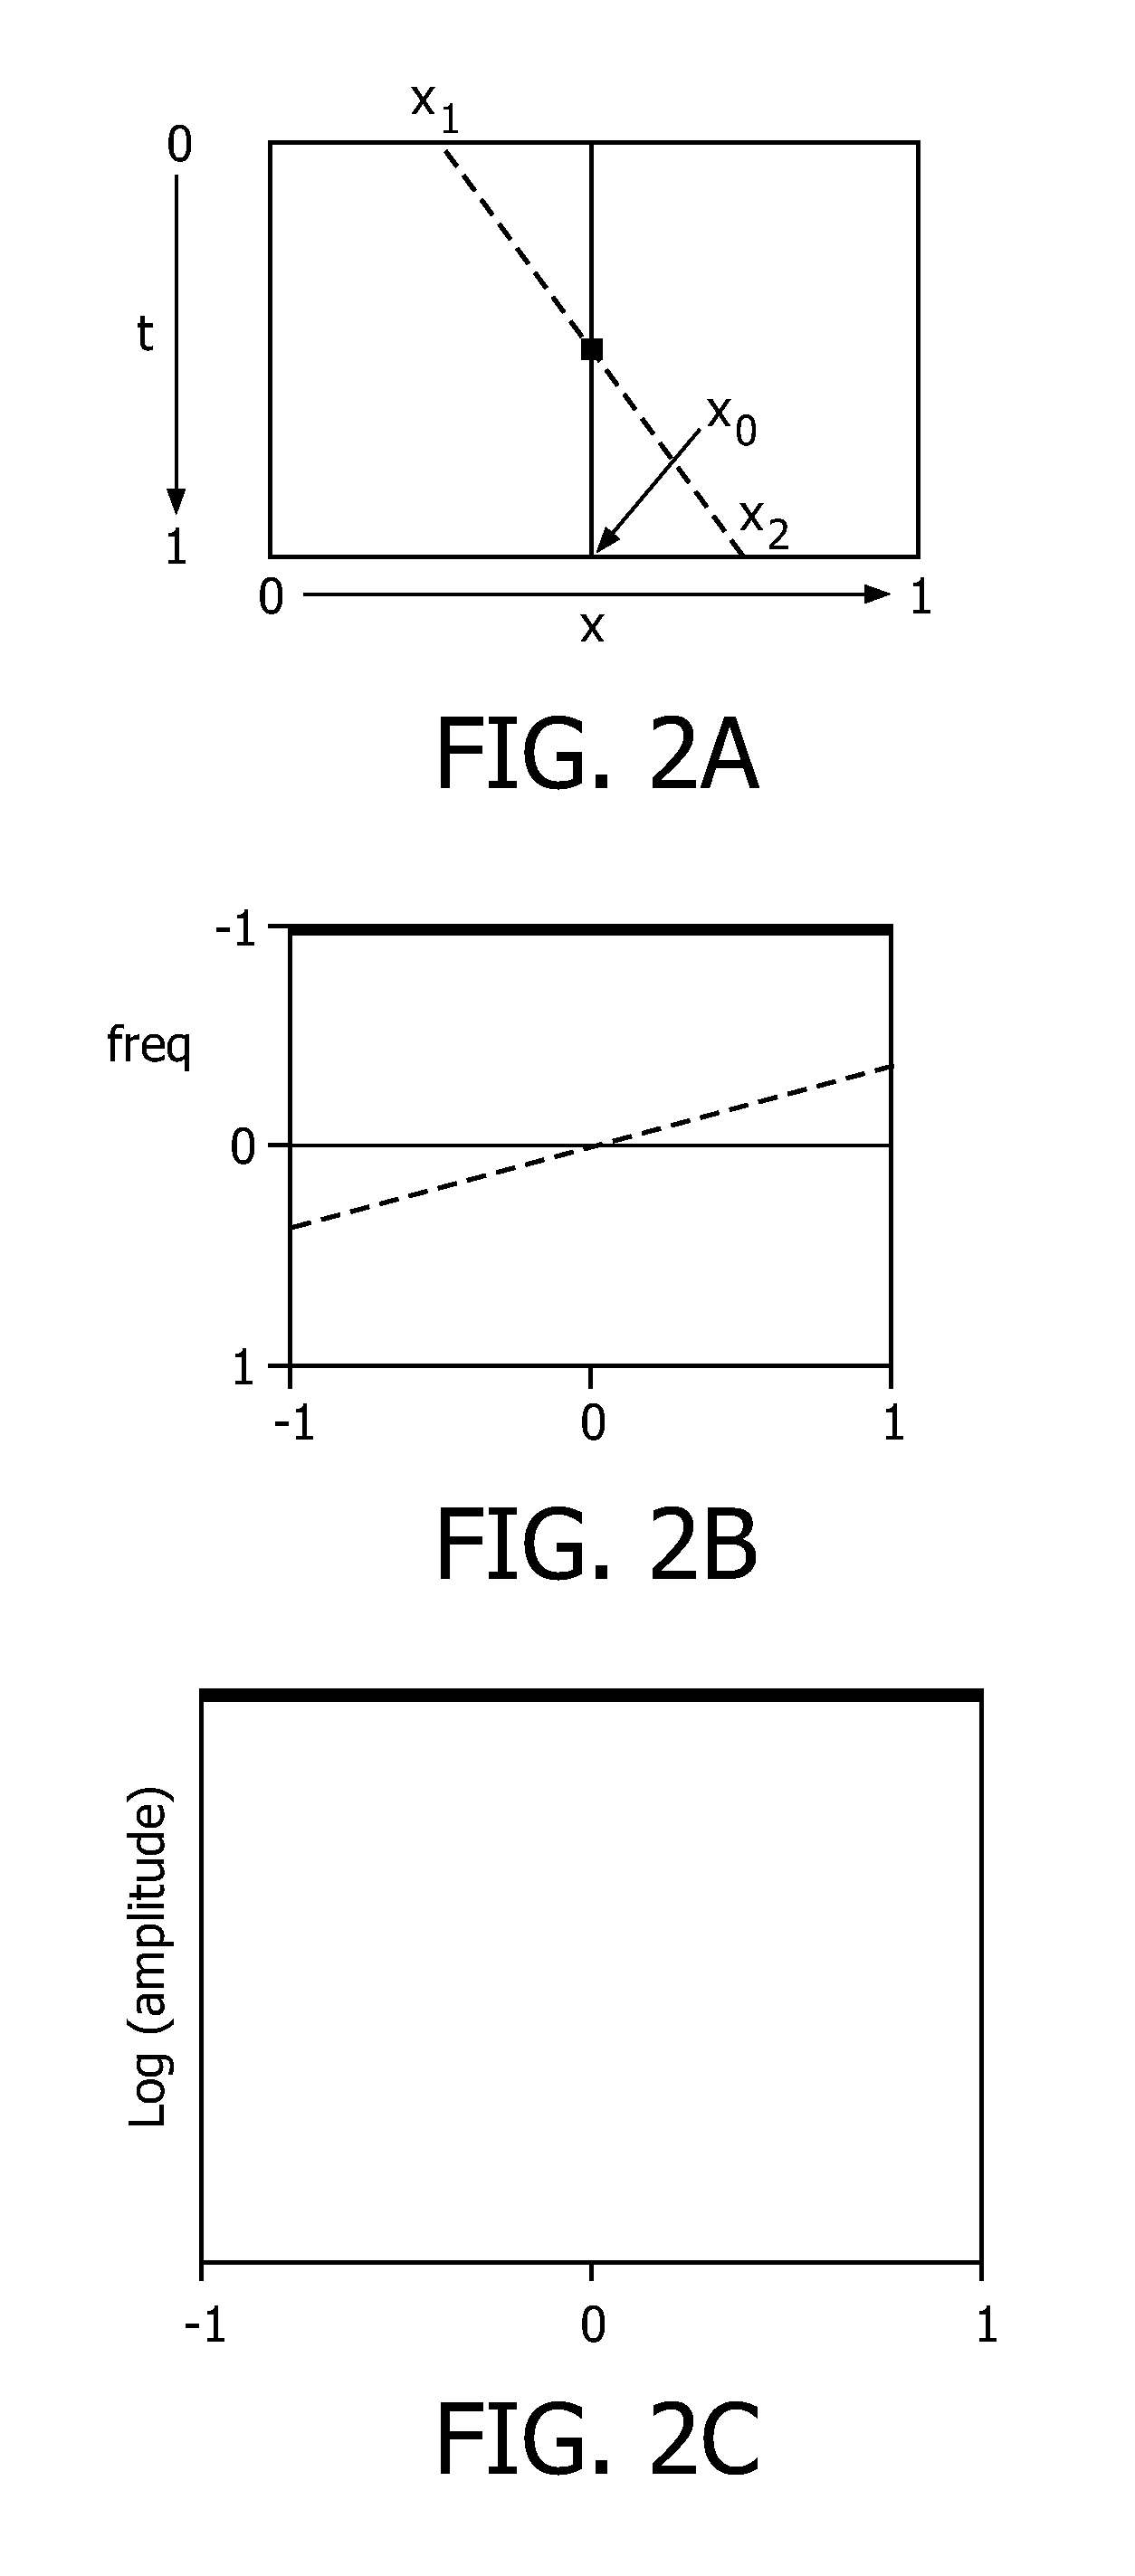 Motion of image sensor, lens and/or focal length to reduce motion blur